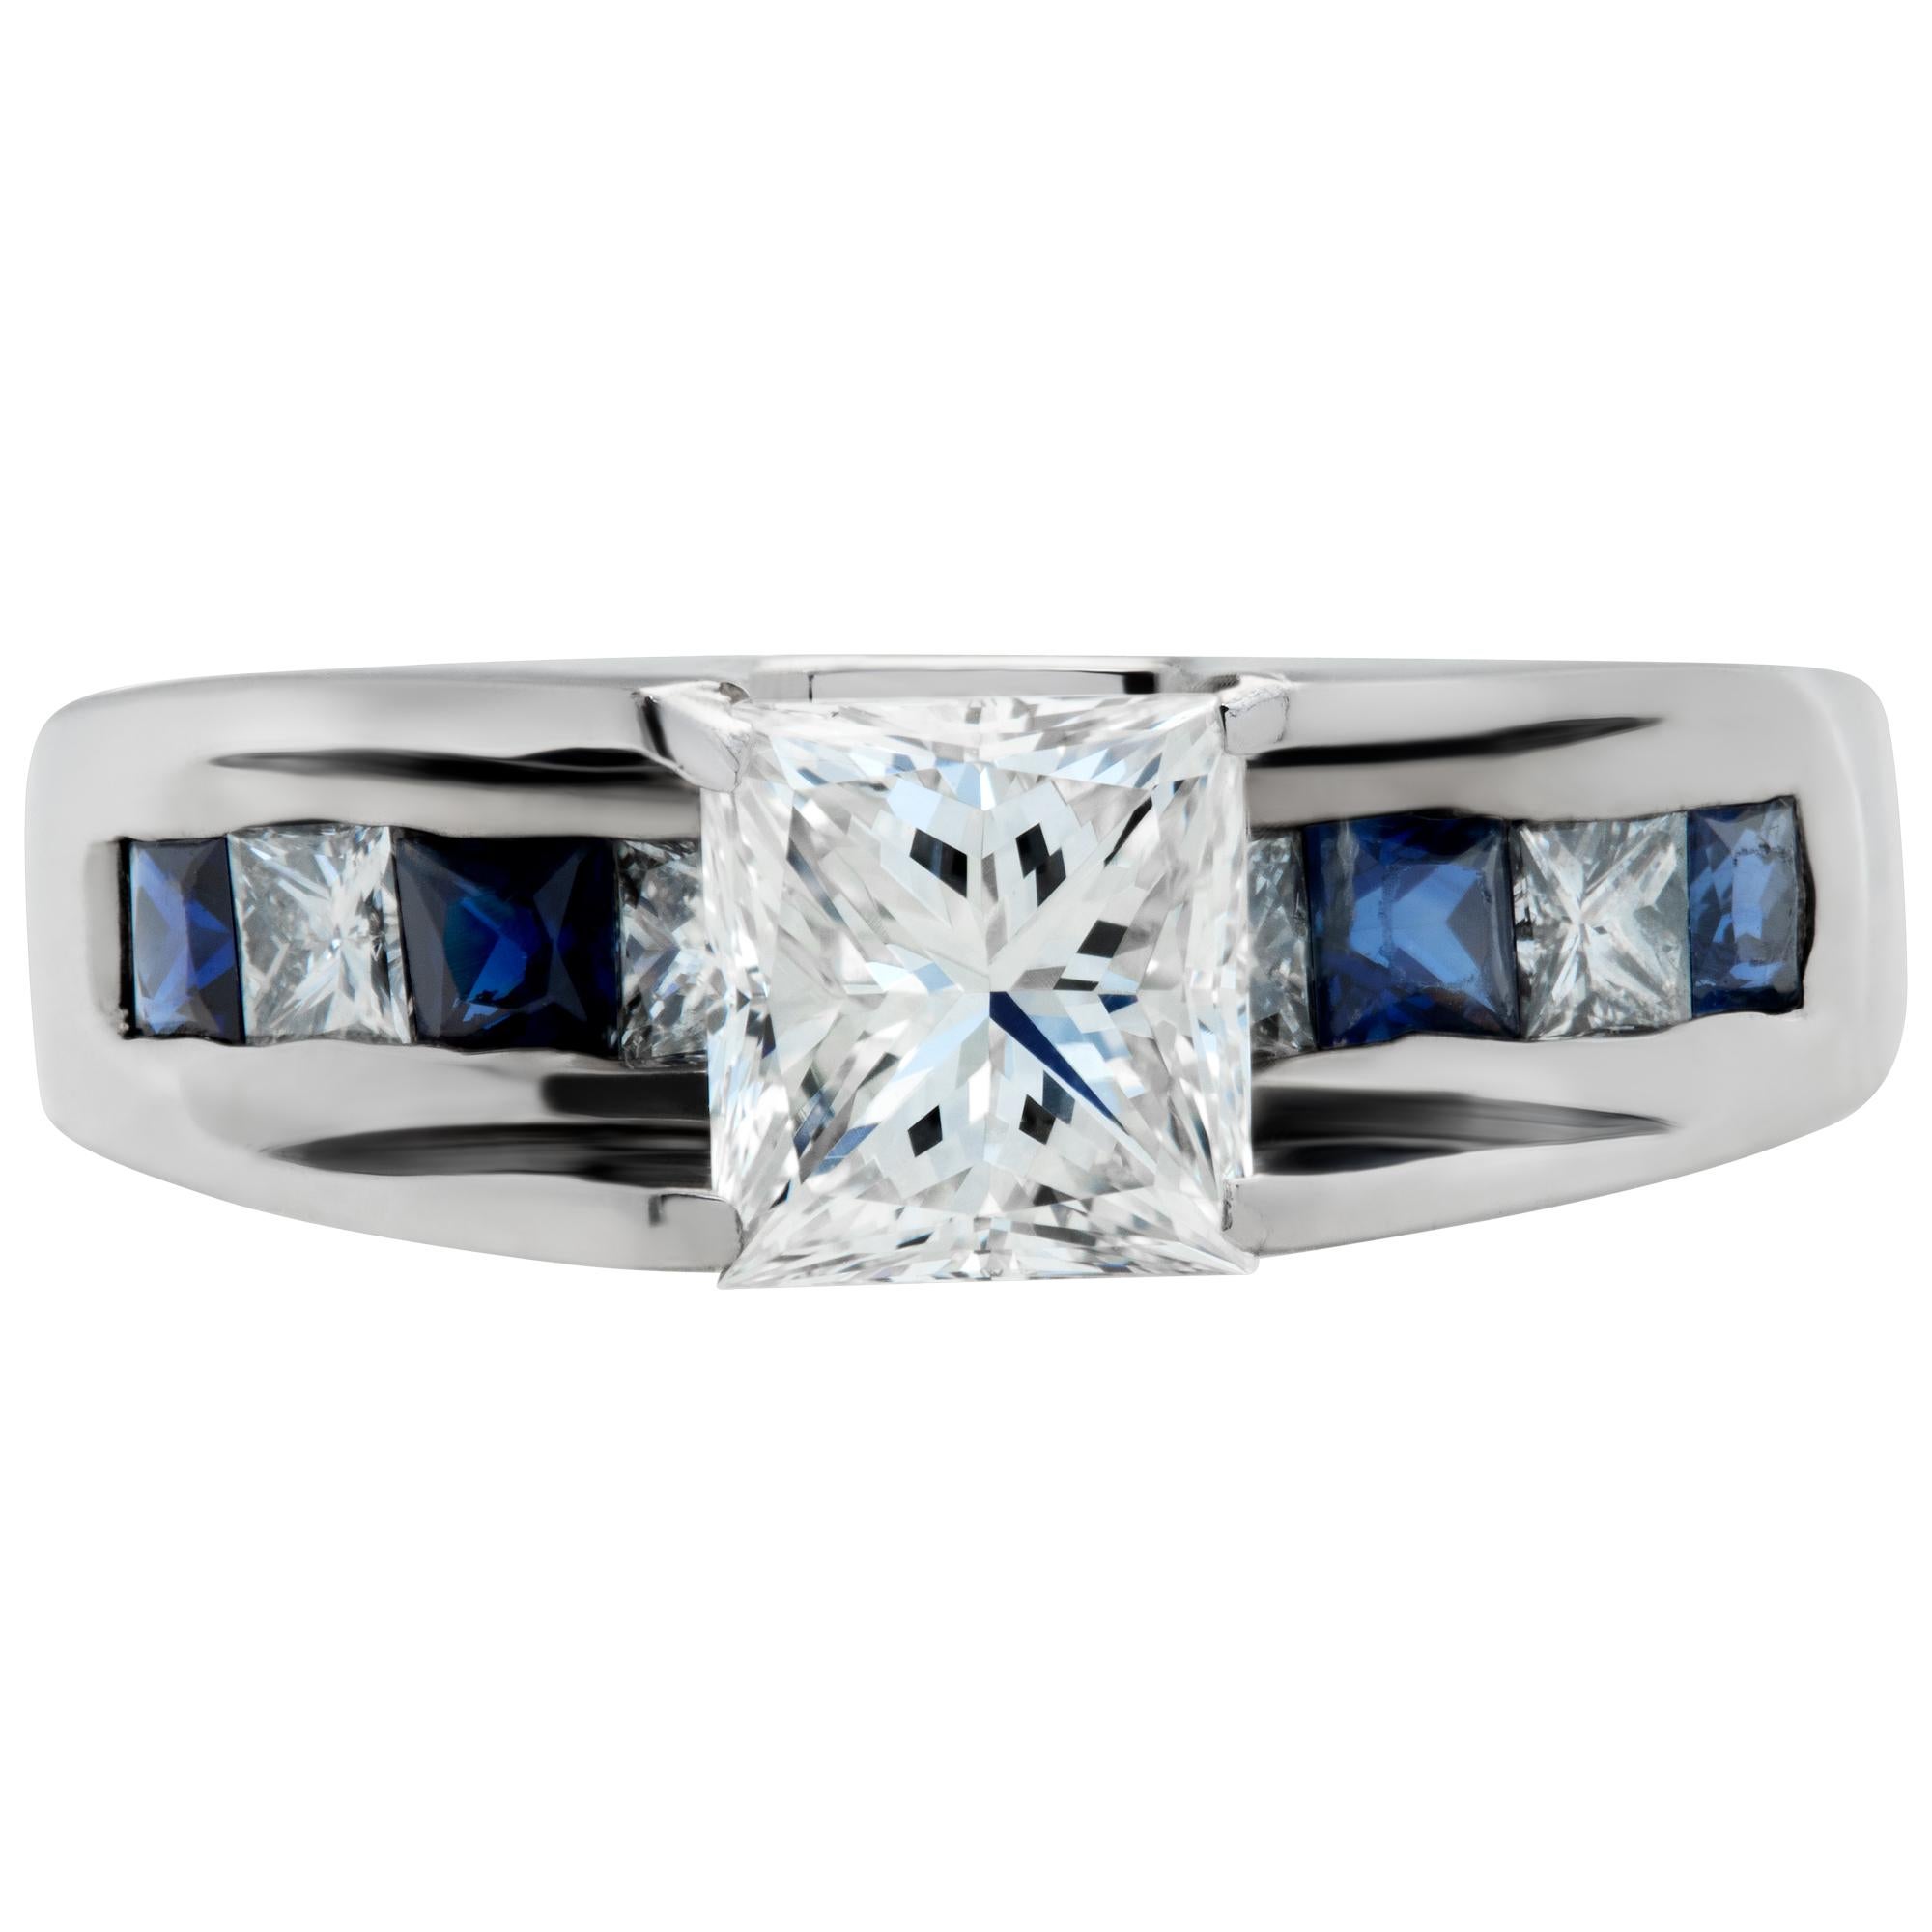 GIA Certified Princess Cut Diamond 1.01 Cts 'H Color, VS2 Clarity' Ring For Sale